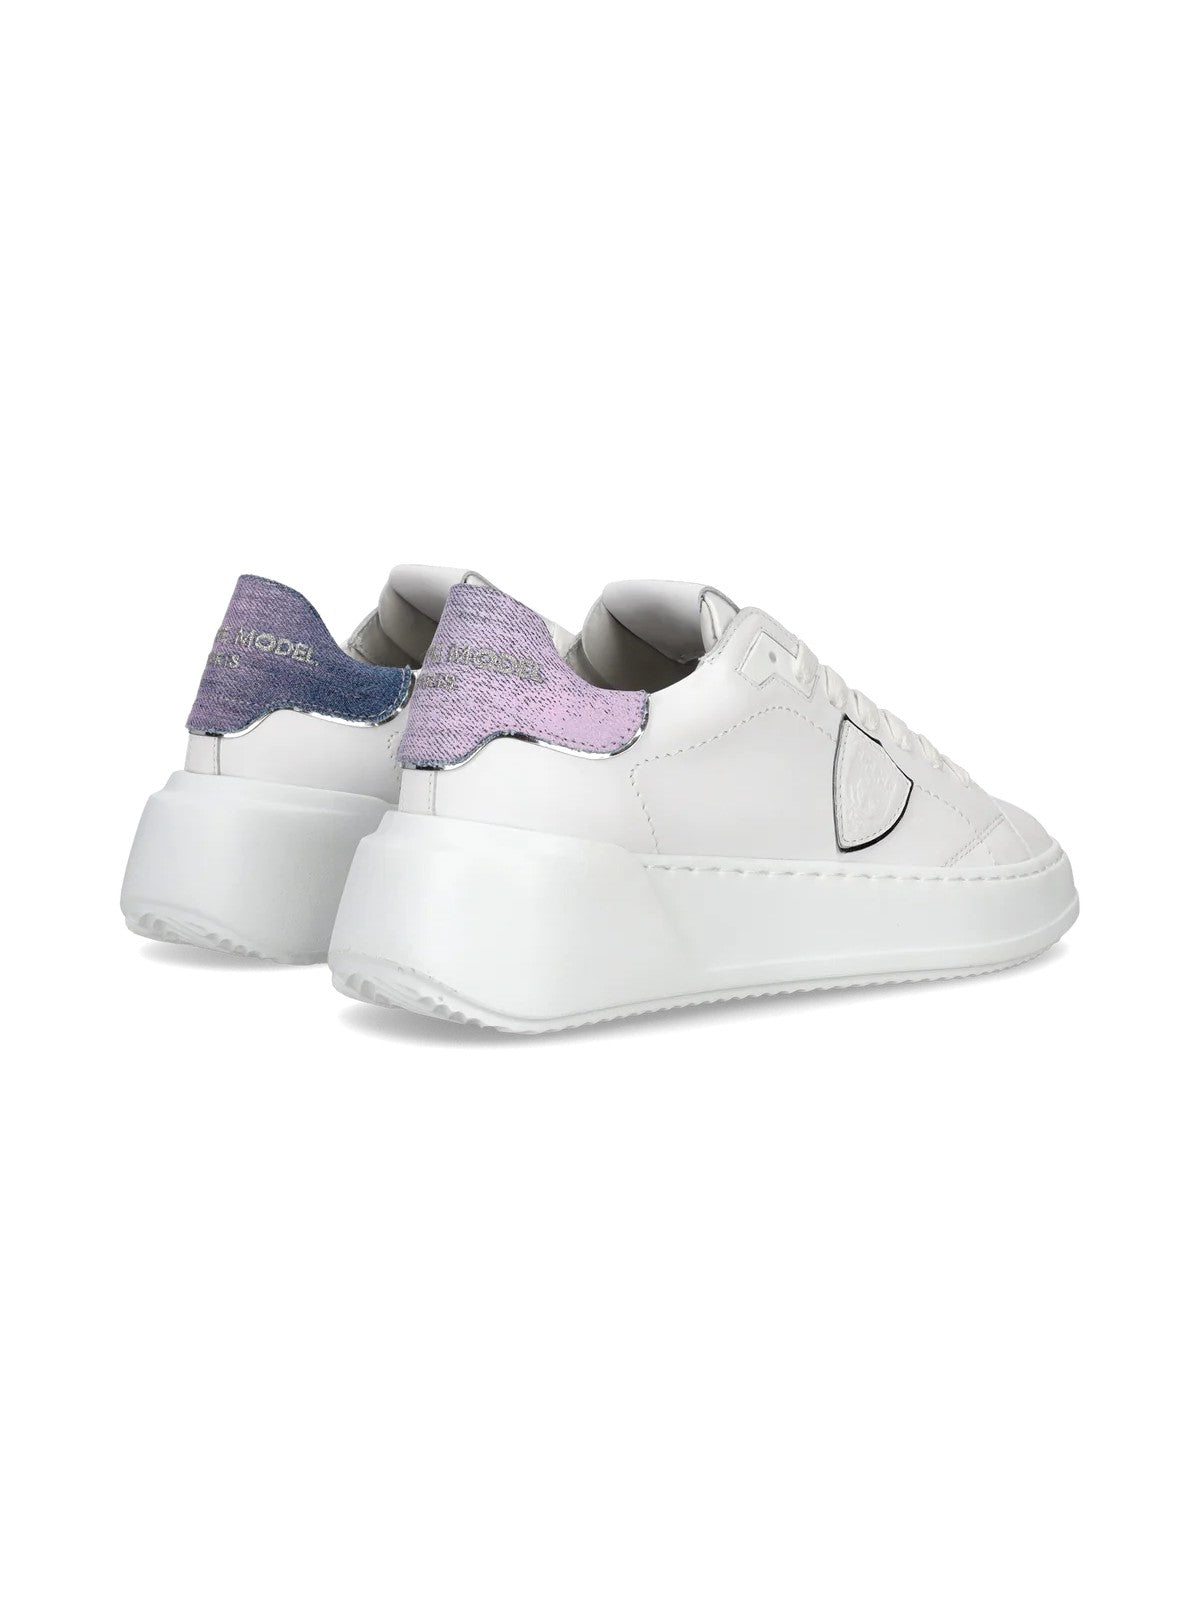 PHILIPPE MODEL Sneaker Donna Tres temple low woman BJLD VDD1 Bianco